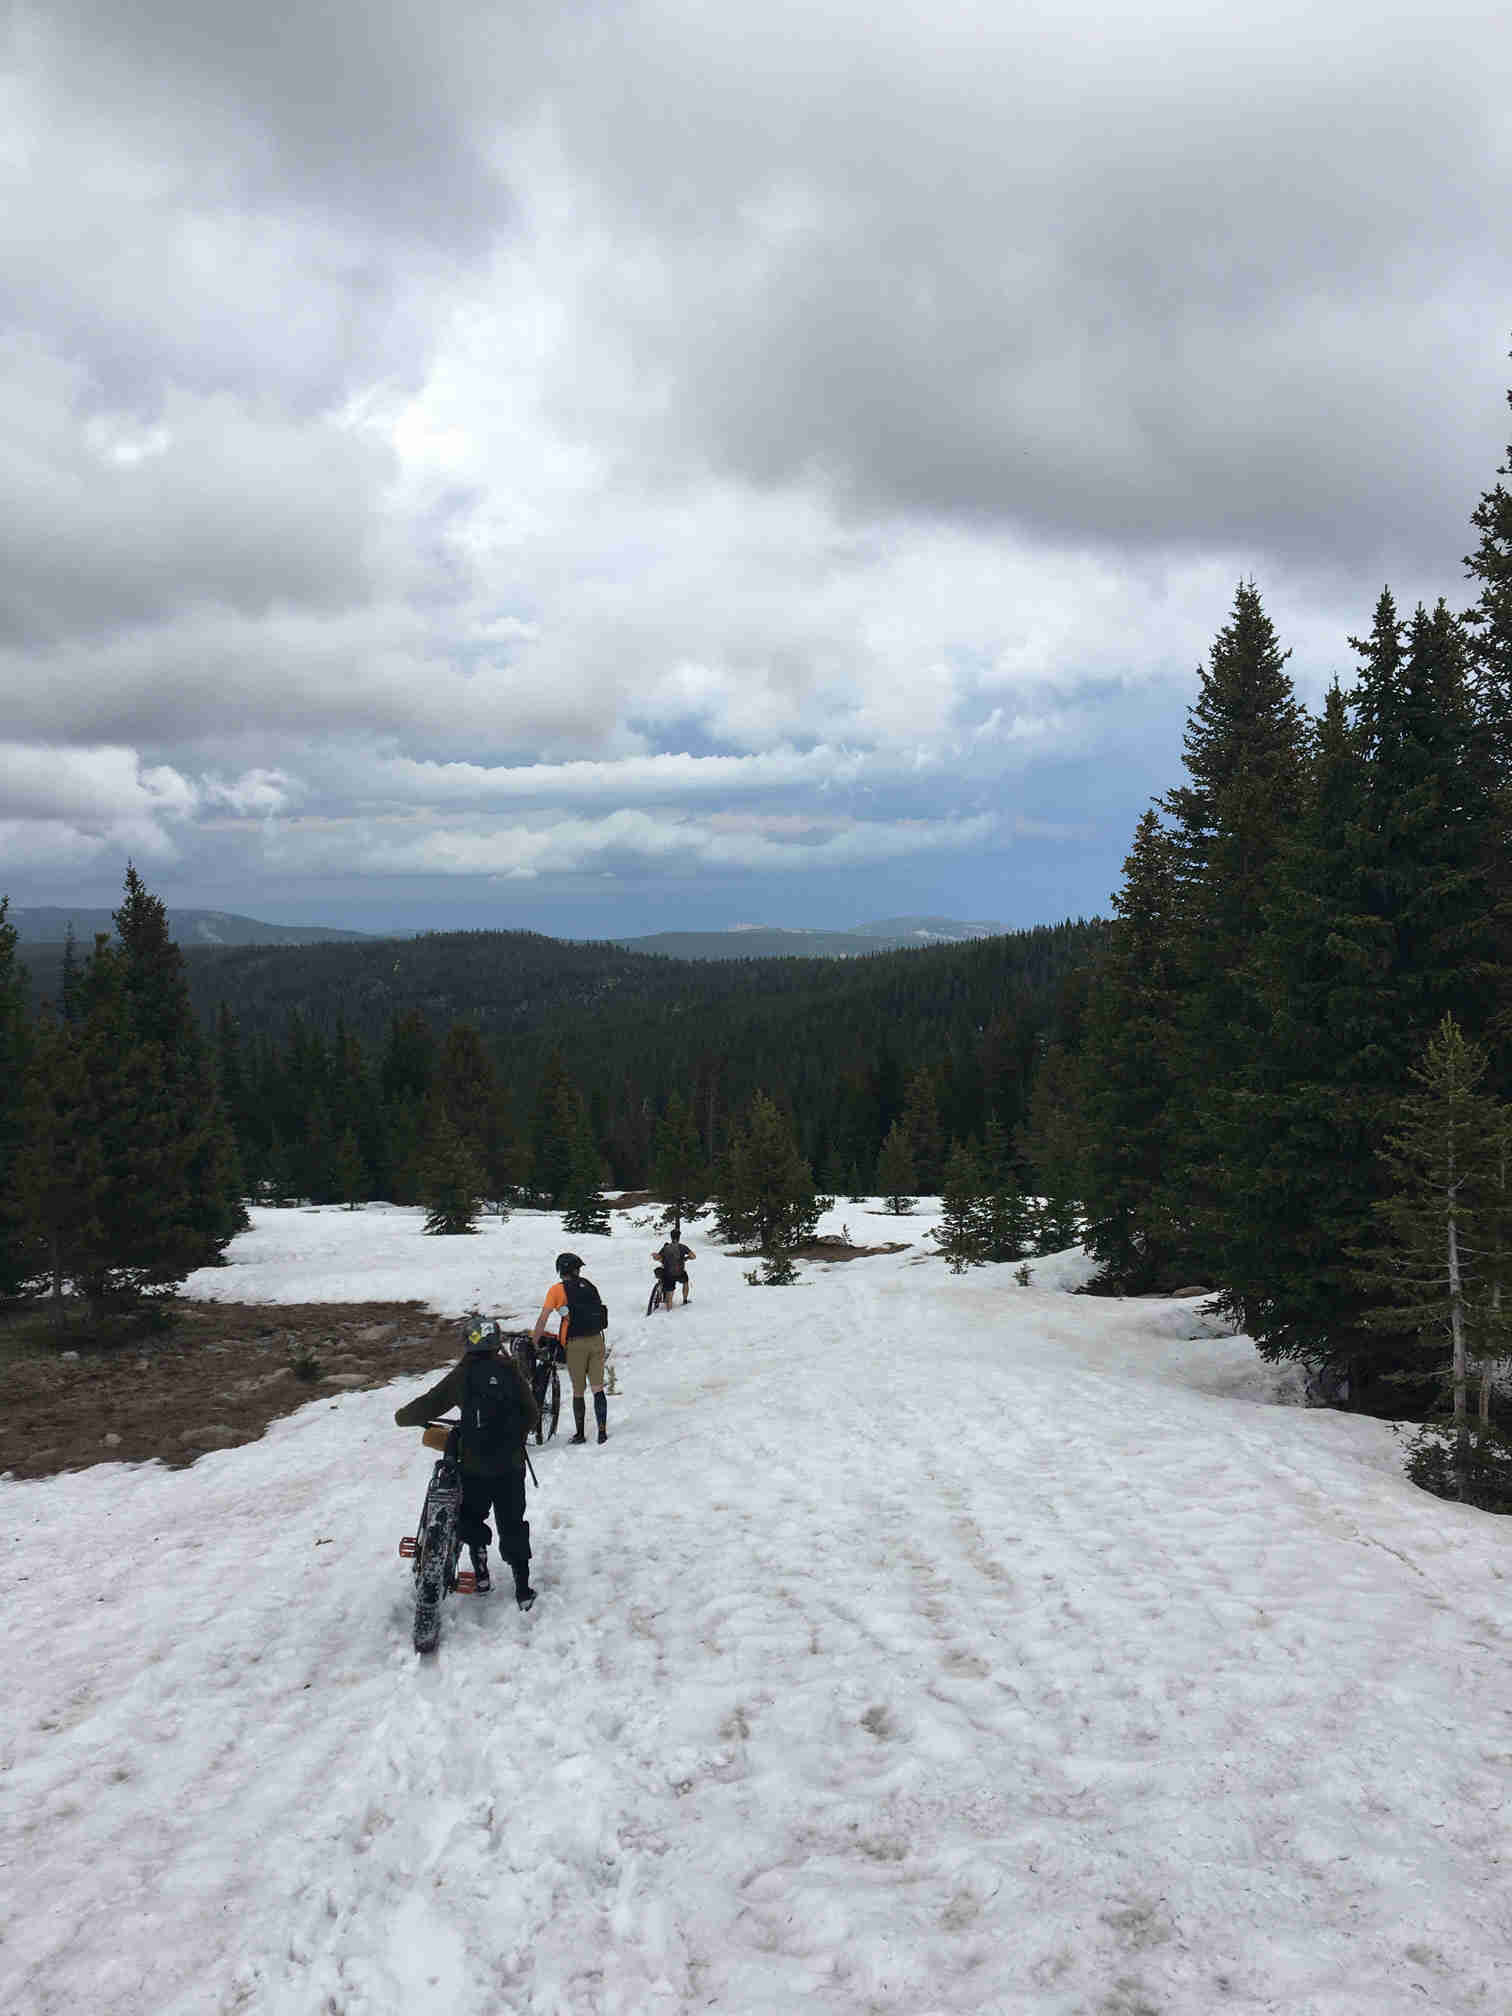 Rear view of 3 cyclists walking their bikes down a snowy hill, with pine trees and mountains ahead